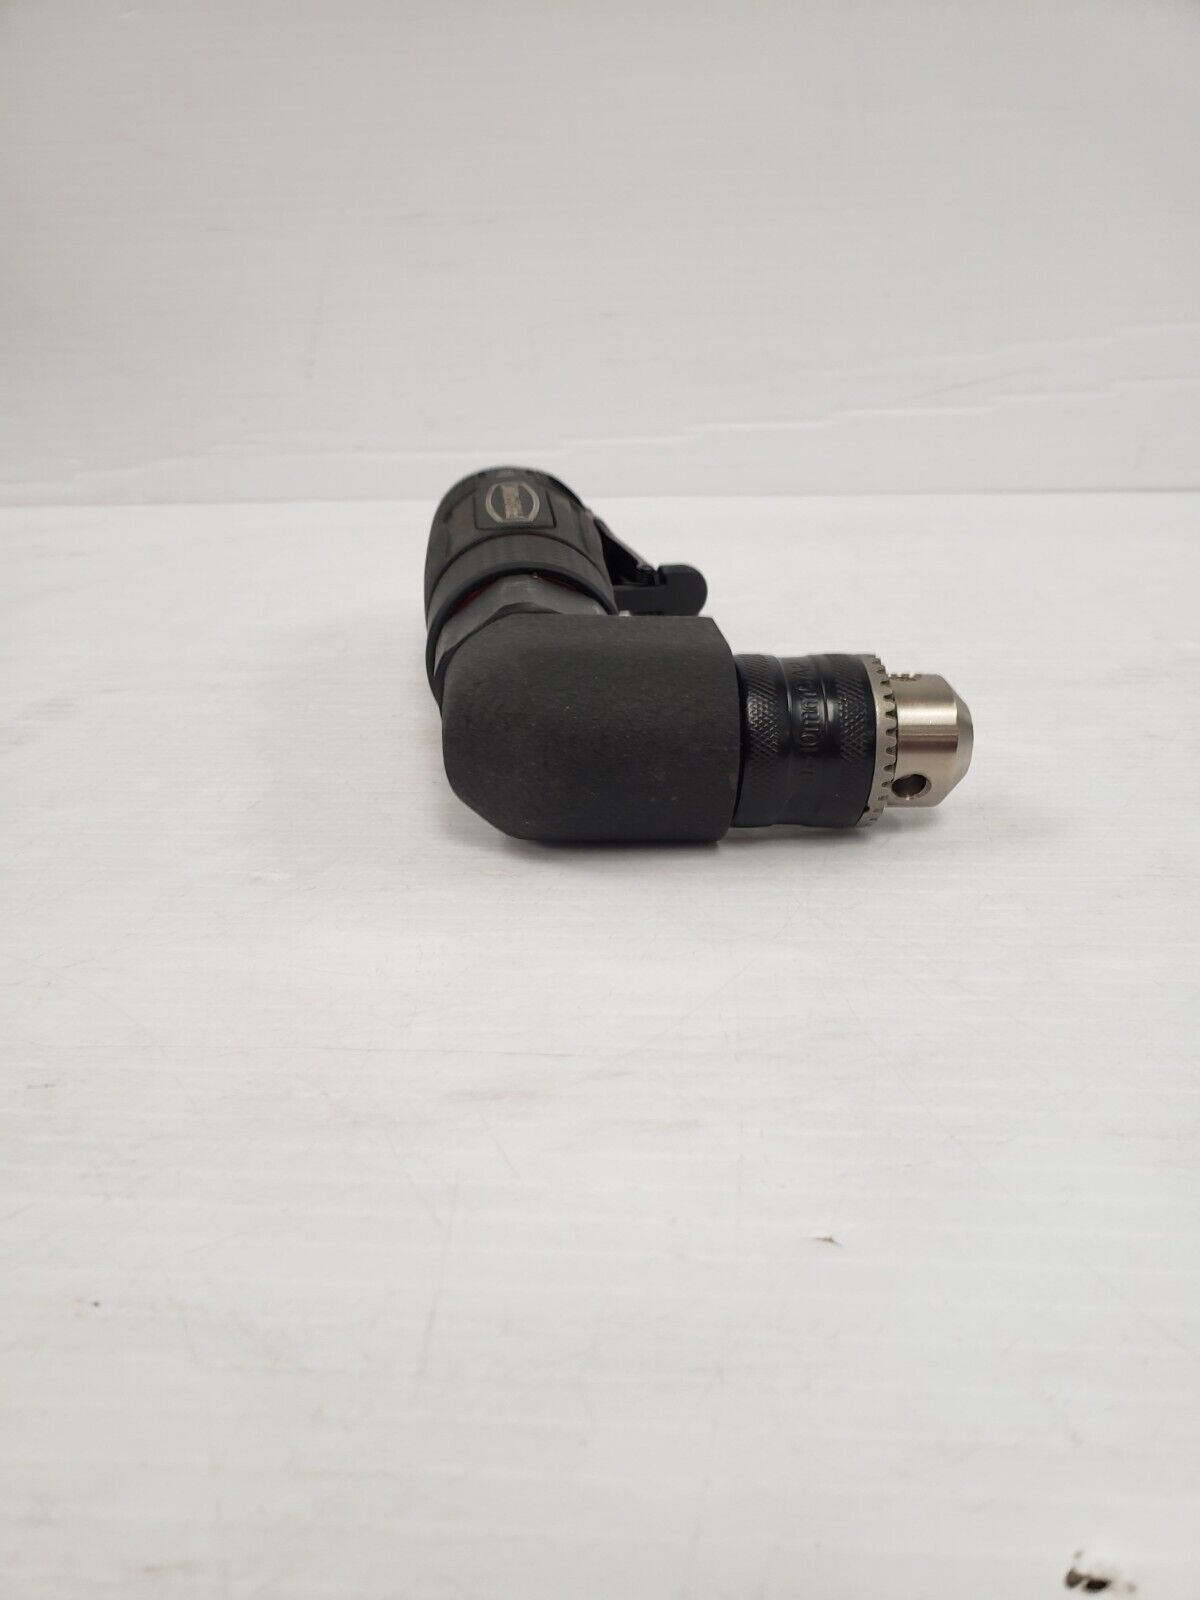 (27931-1) Pro Point 8843914 Air Drill